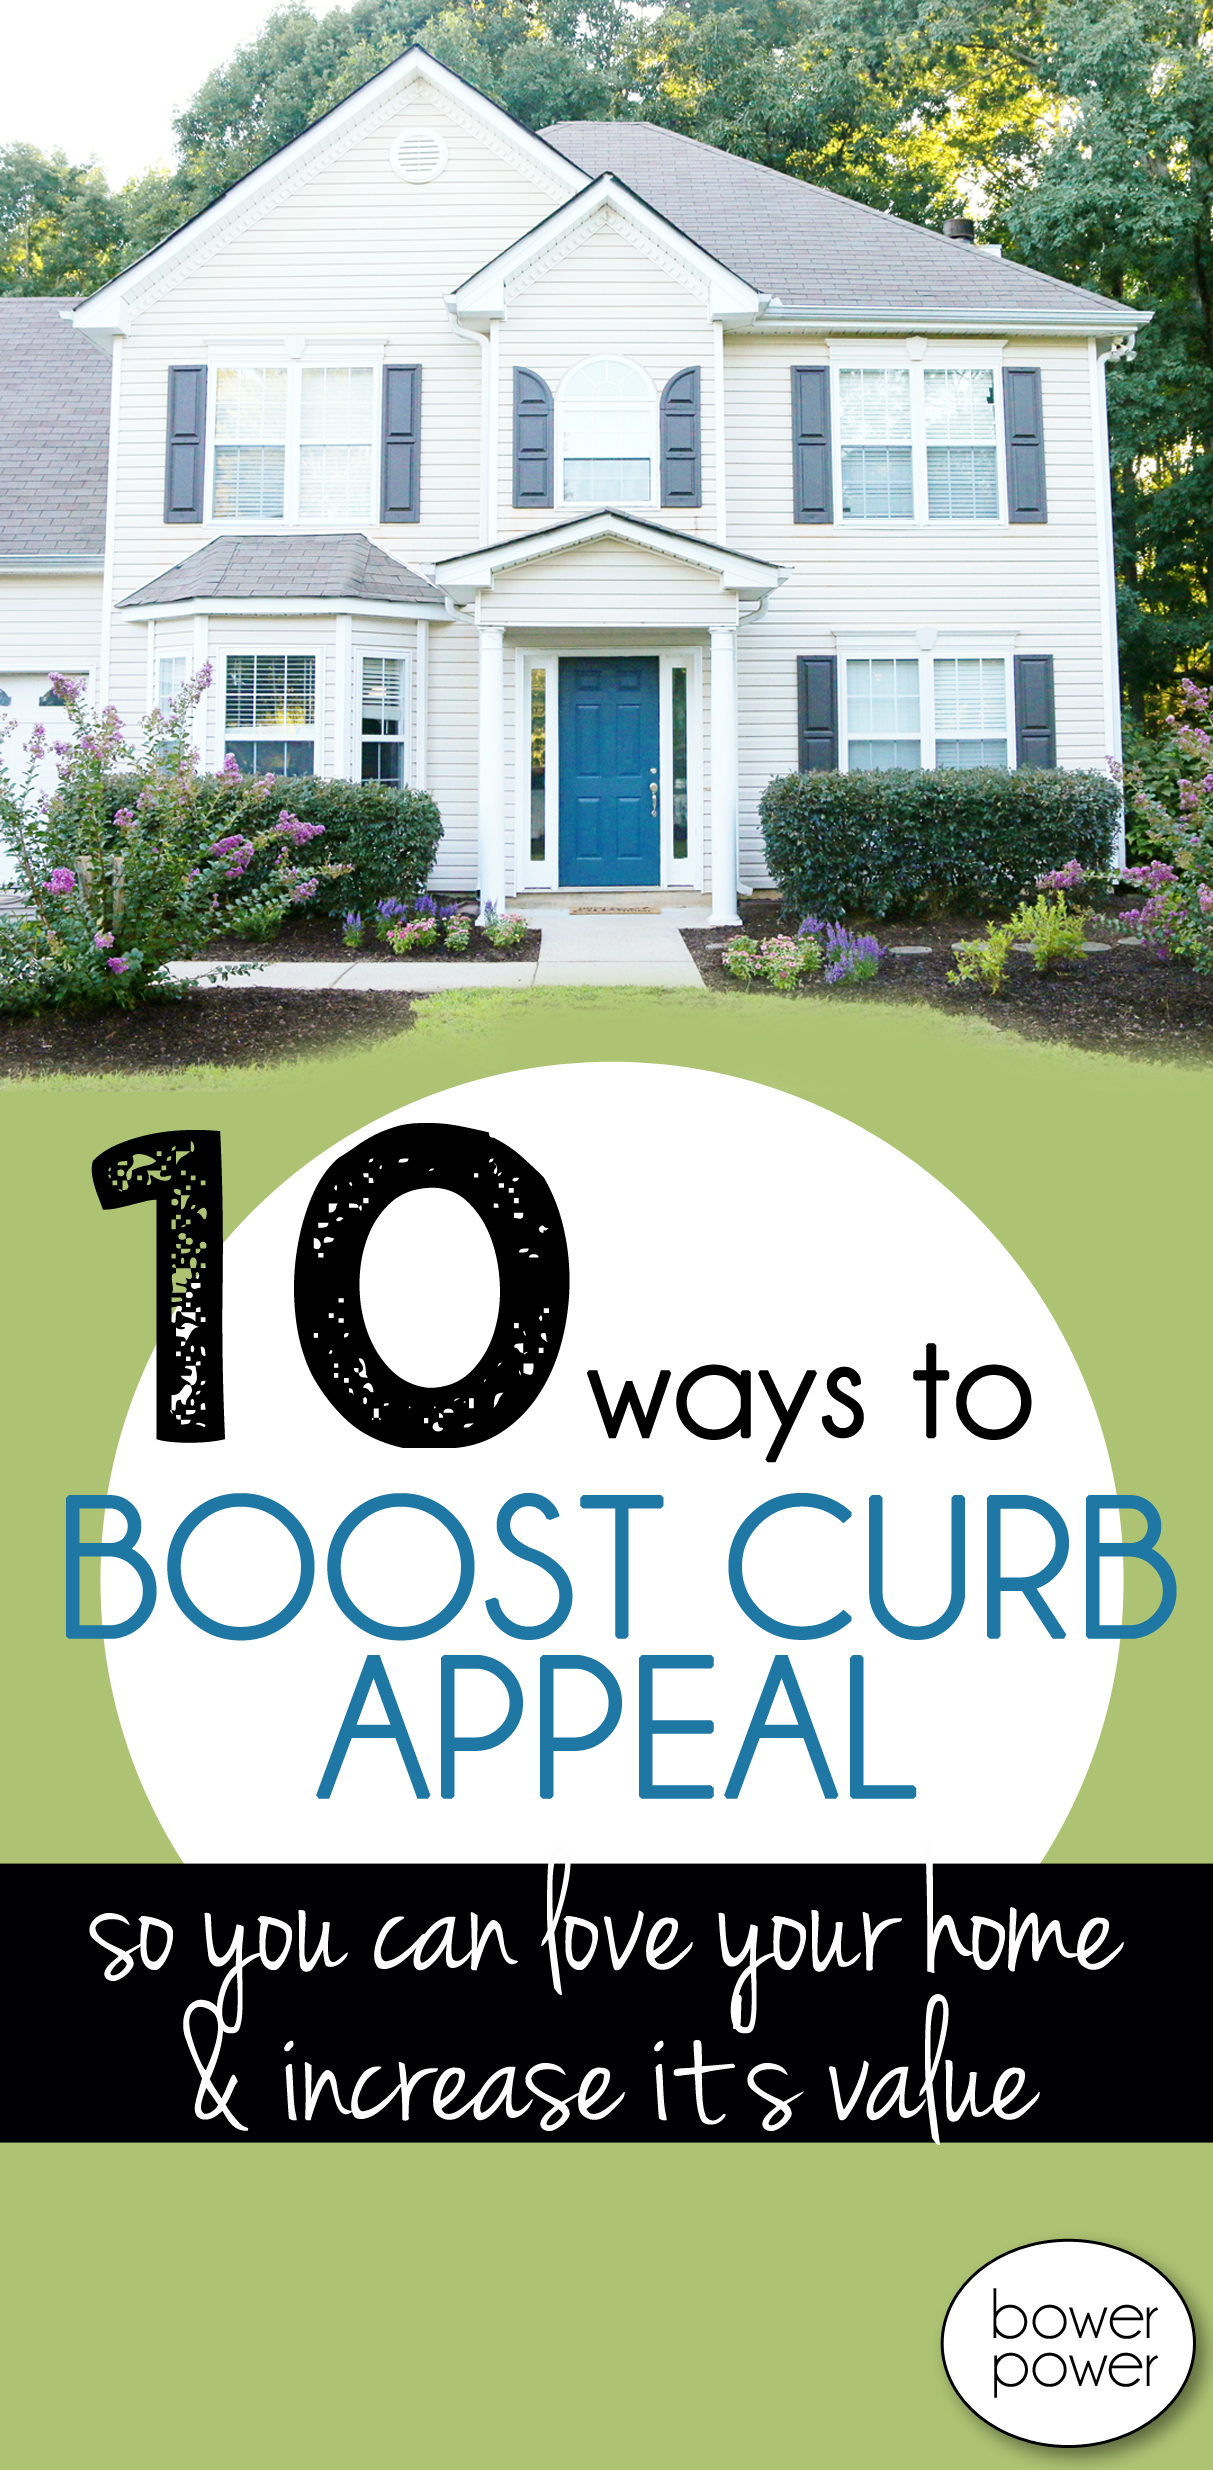 Increase Curb Appeal - Bower Power